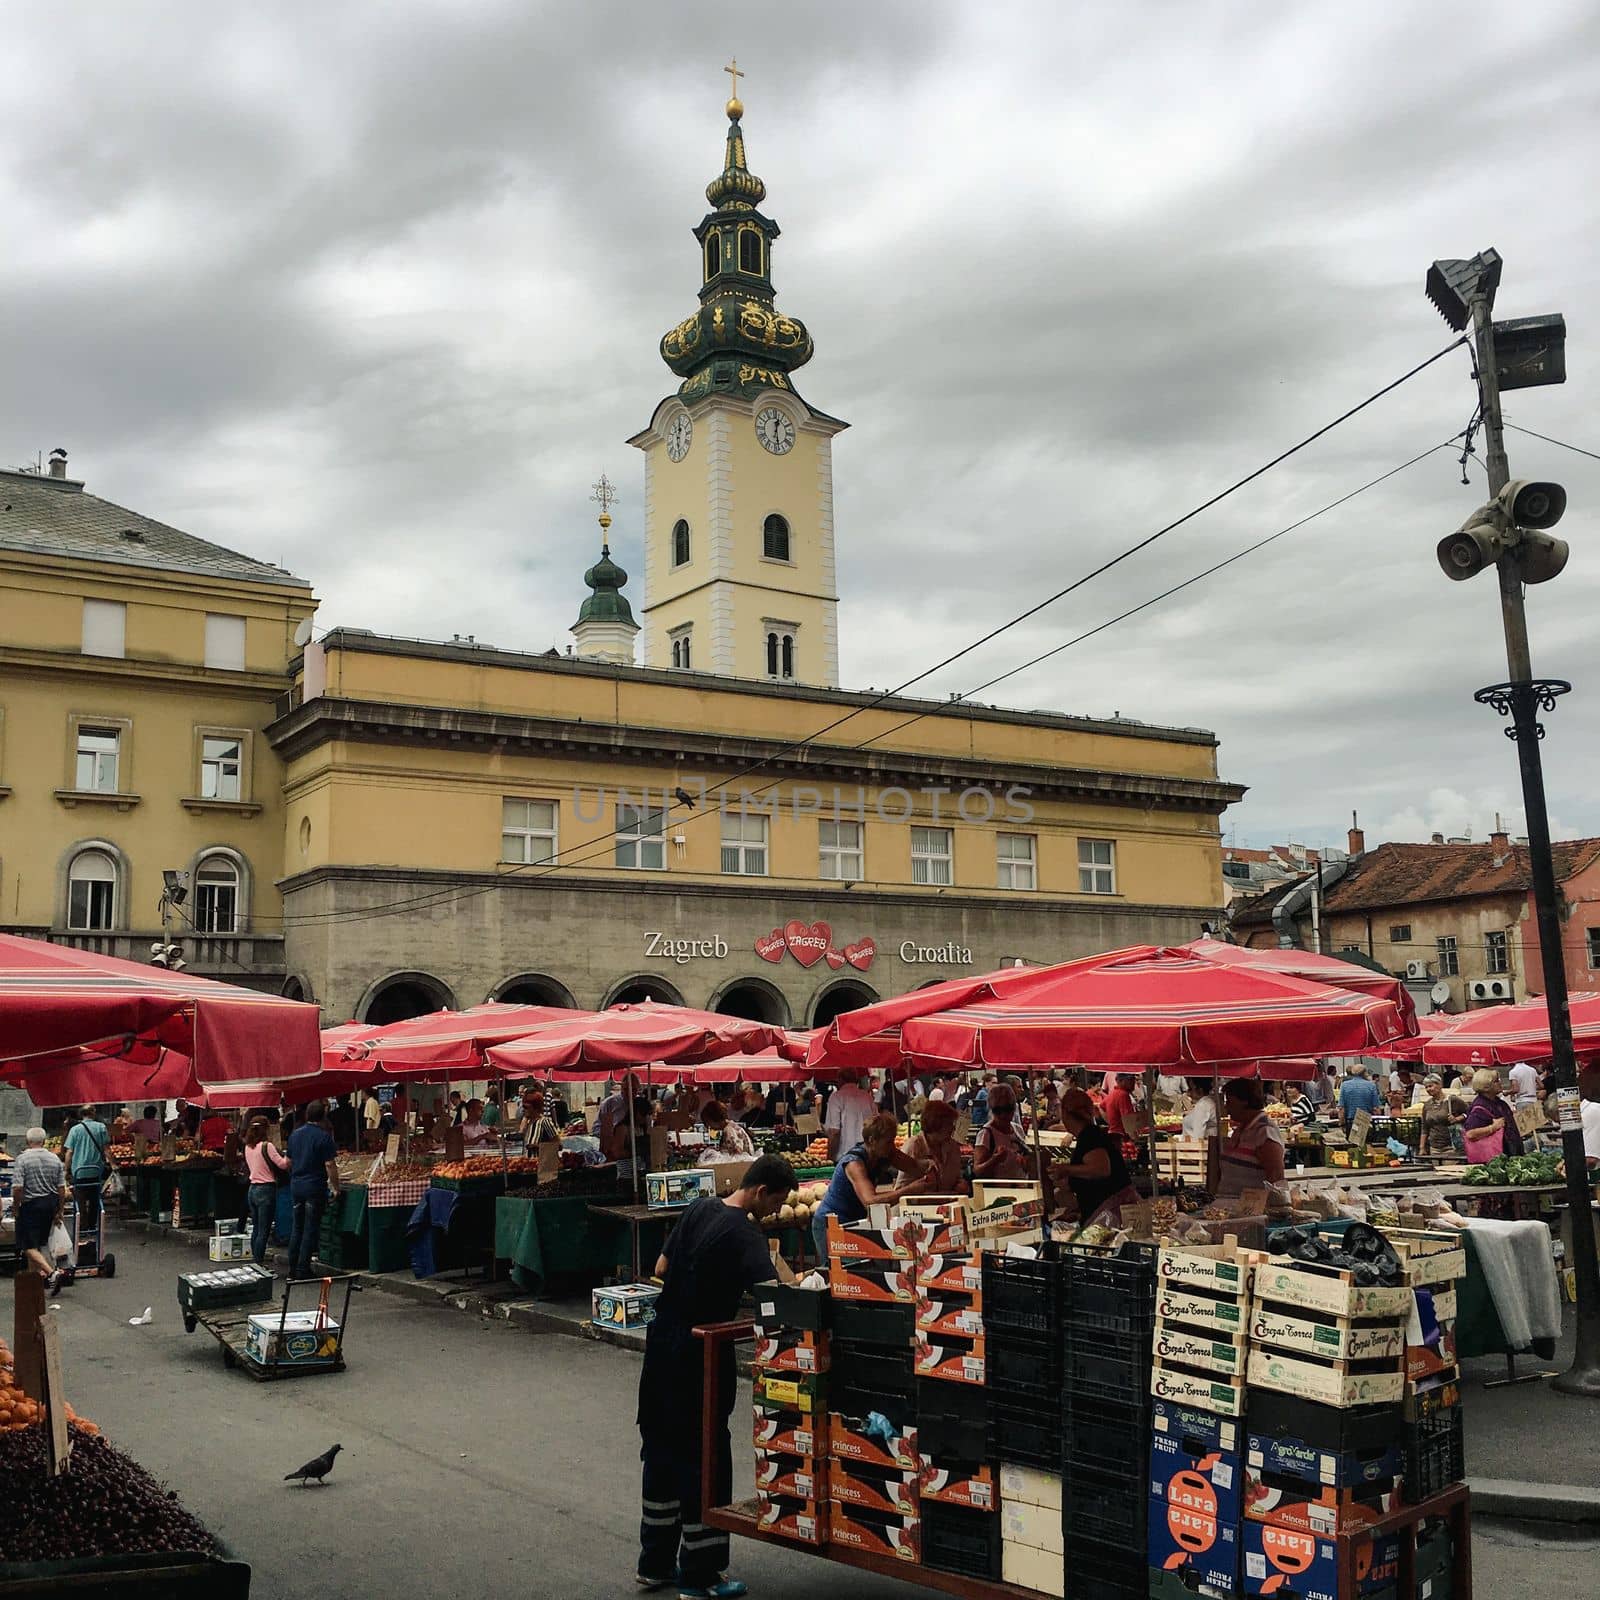 Market with street food and souvenirs in zagreb croatia. High quality photo